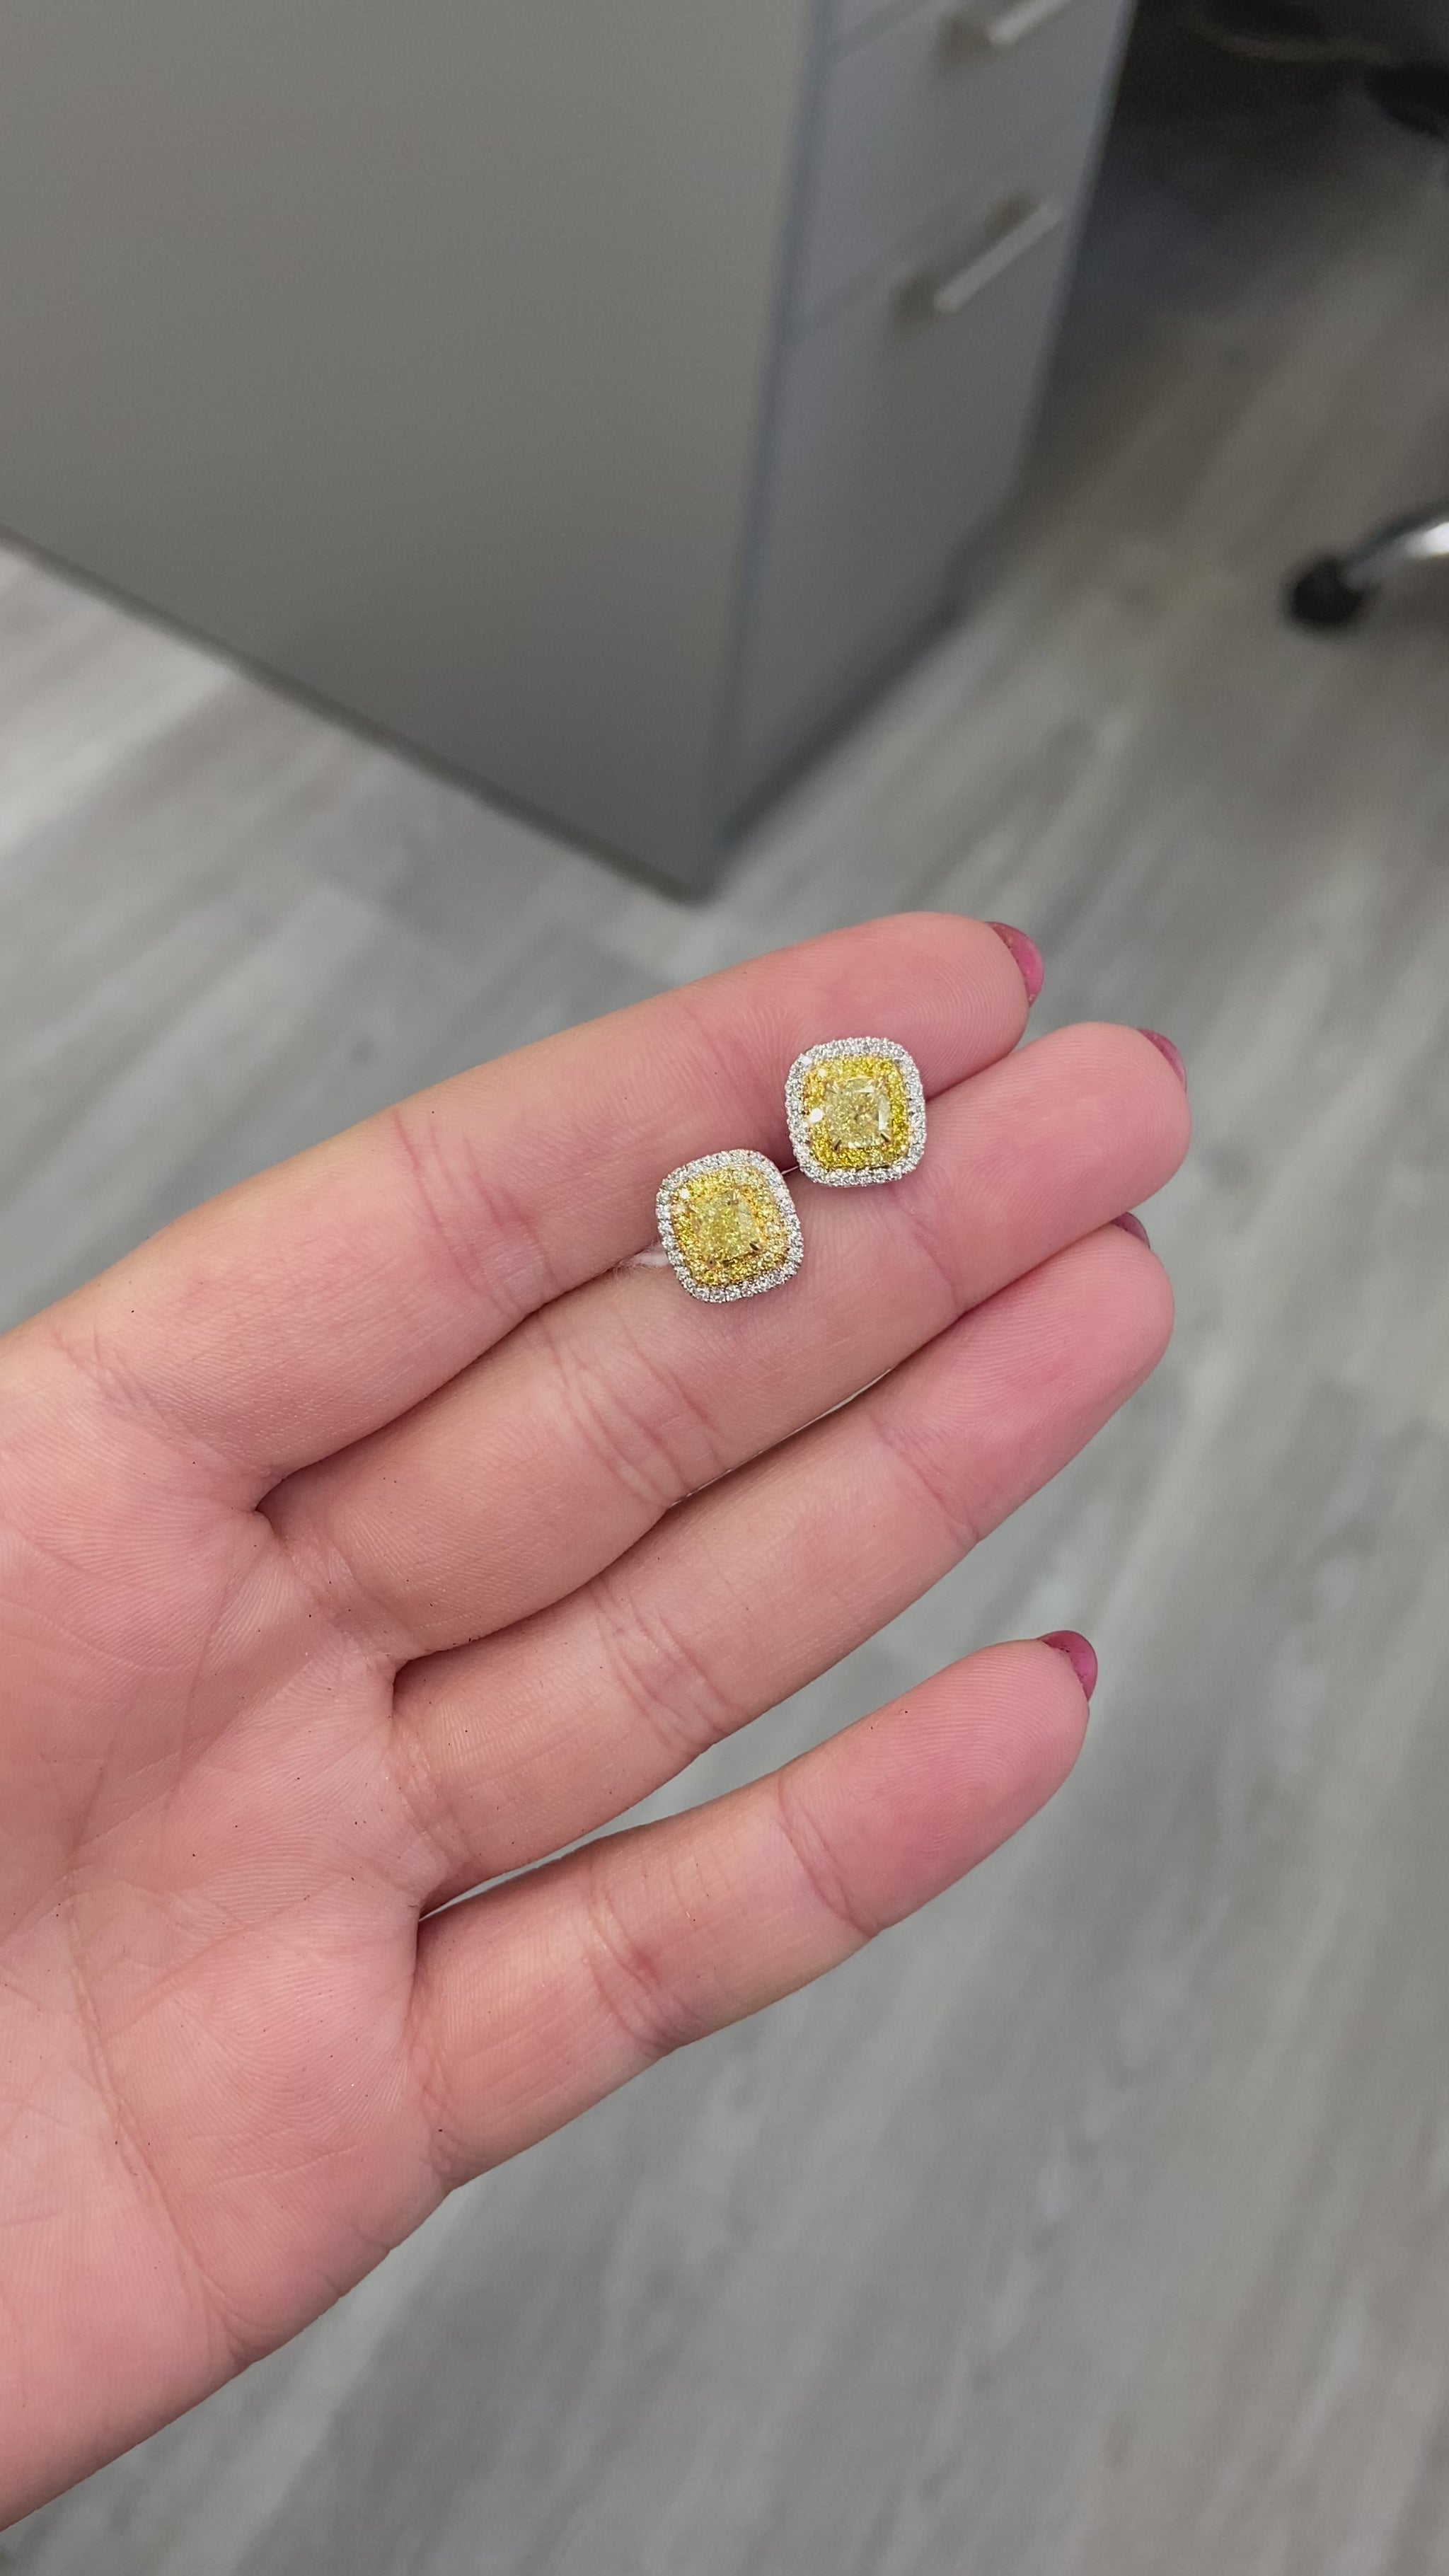 Classic diamond studs made bolder. In the center a vibrant fancy yellow cushion surrounded by a double halo. Fancy Yellow Cushion Studs 1.38 carat total diamond weight VS Clarity Center diamonds are 0.50ct each Surrounded by fancy yellow and white diamond. Set in 18k Gold